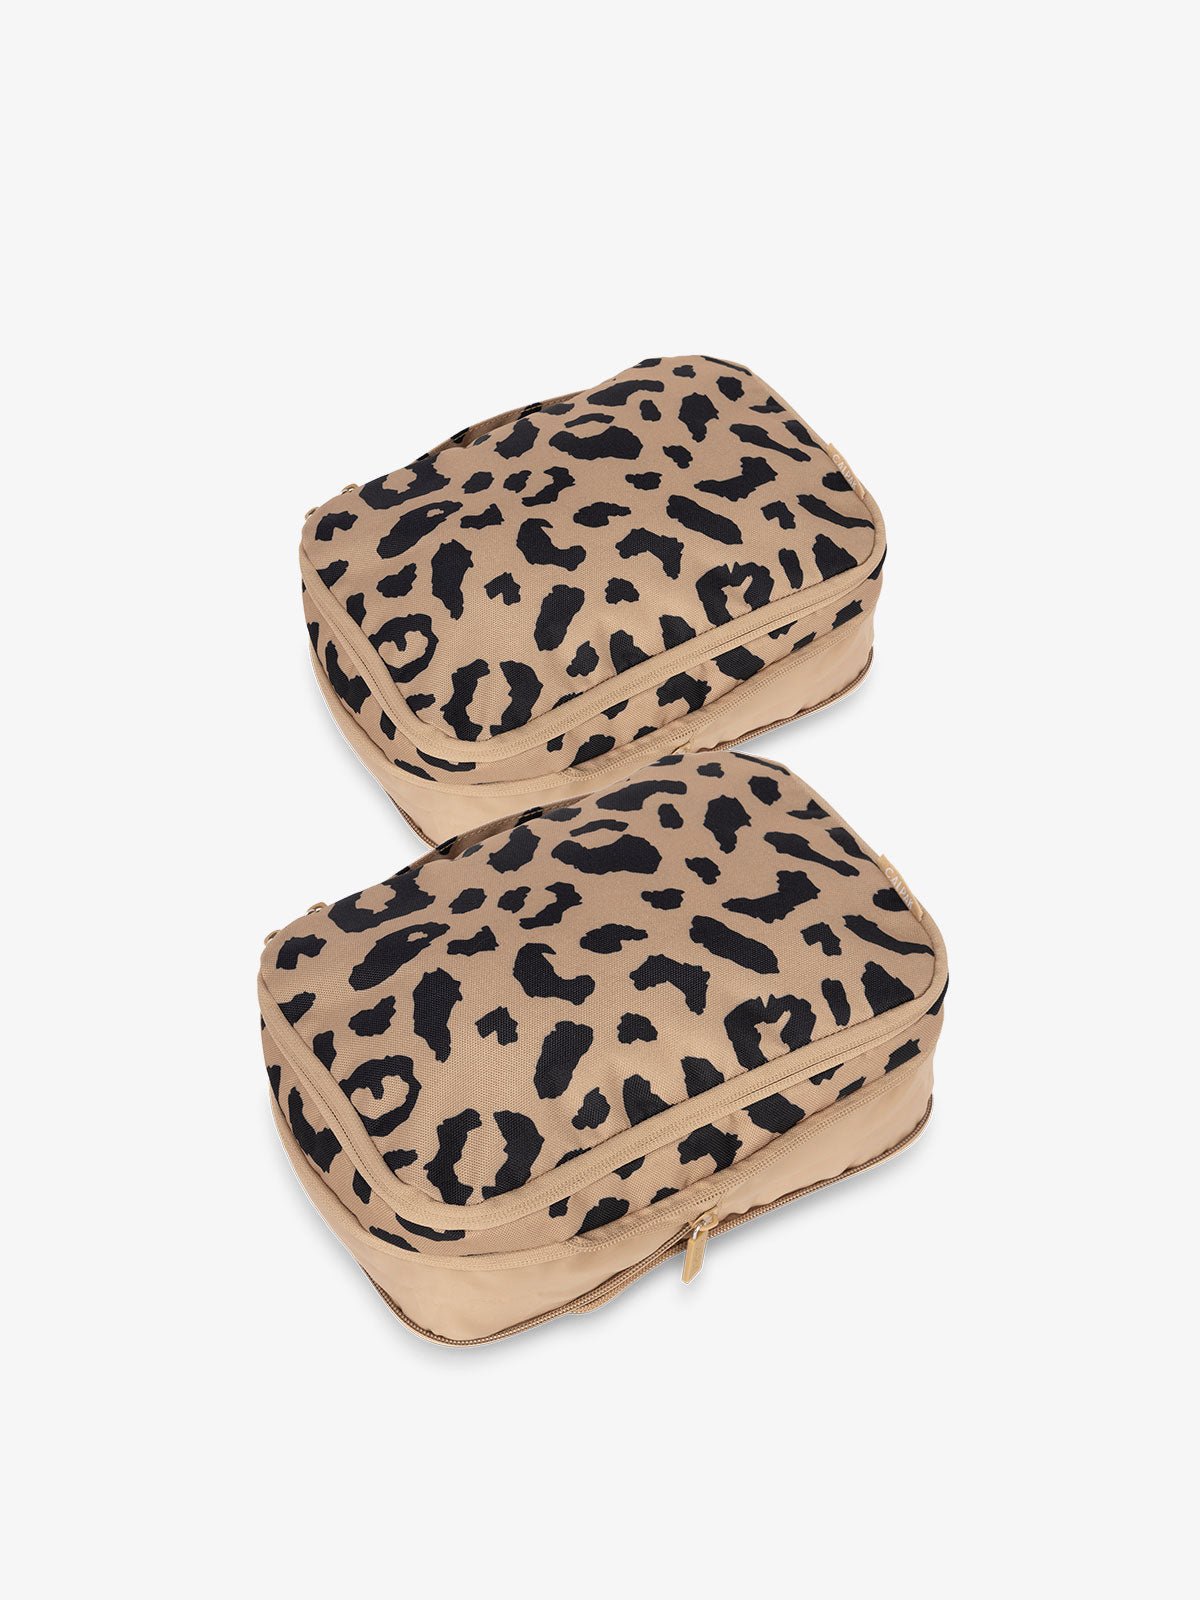 CALPAK small compression packing cubes with top handles and expandable by 4.5 inches in cheetah print